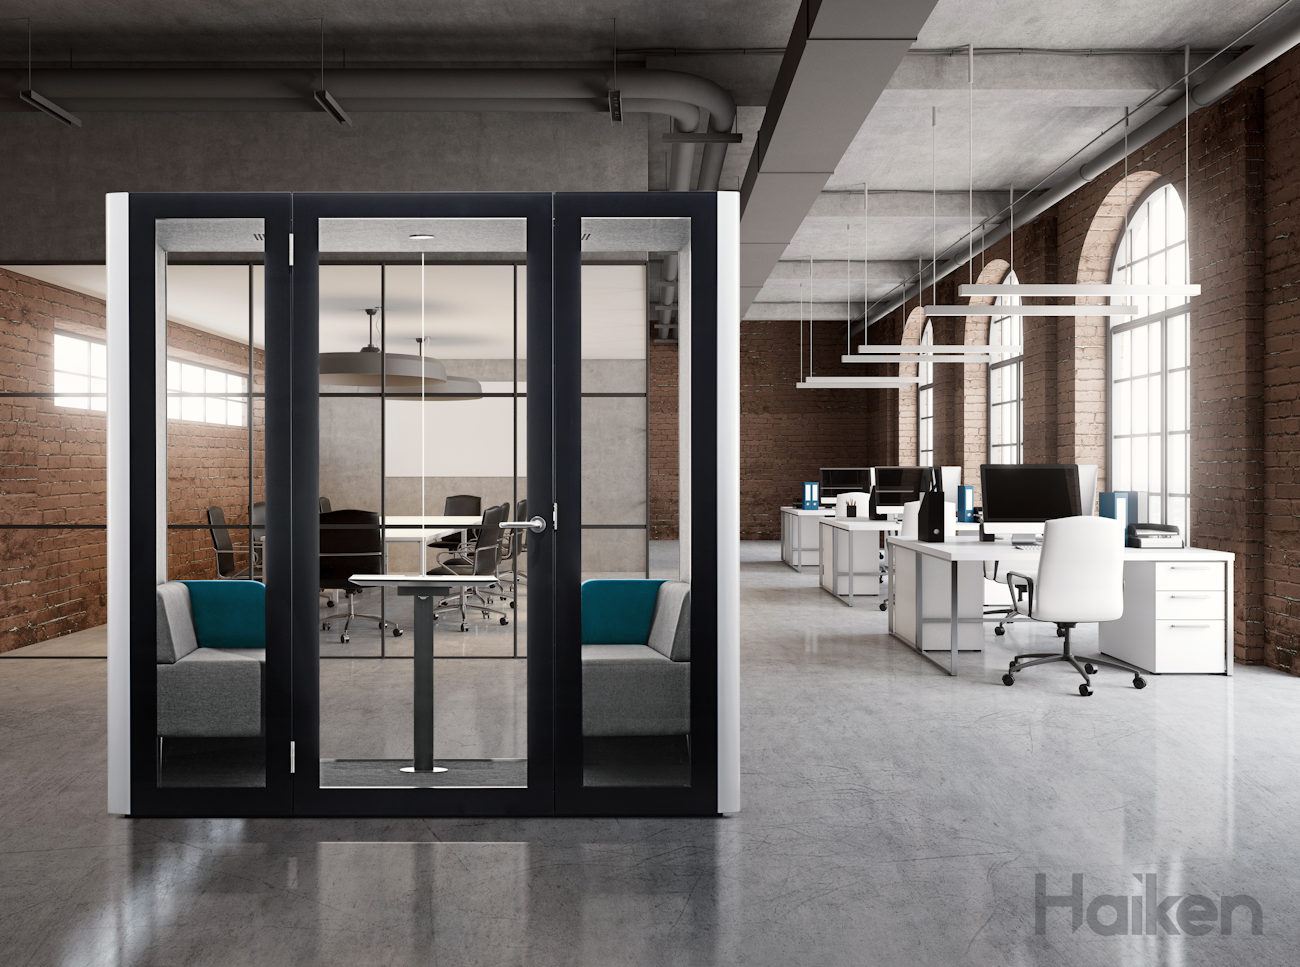 A buyer's guide to office meeting pods